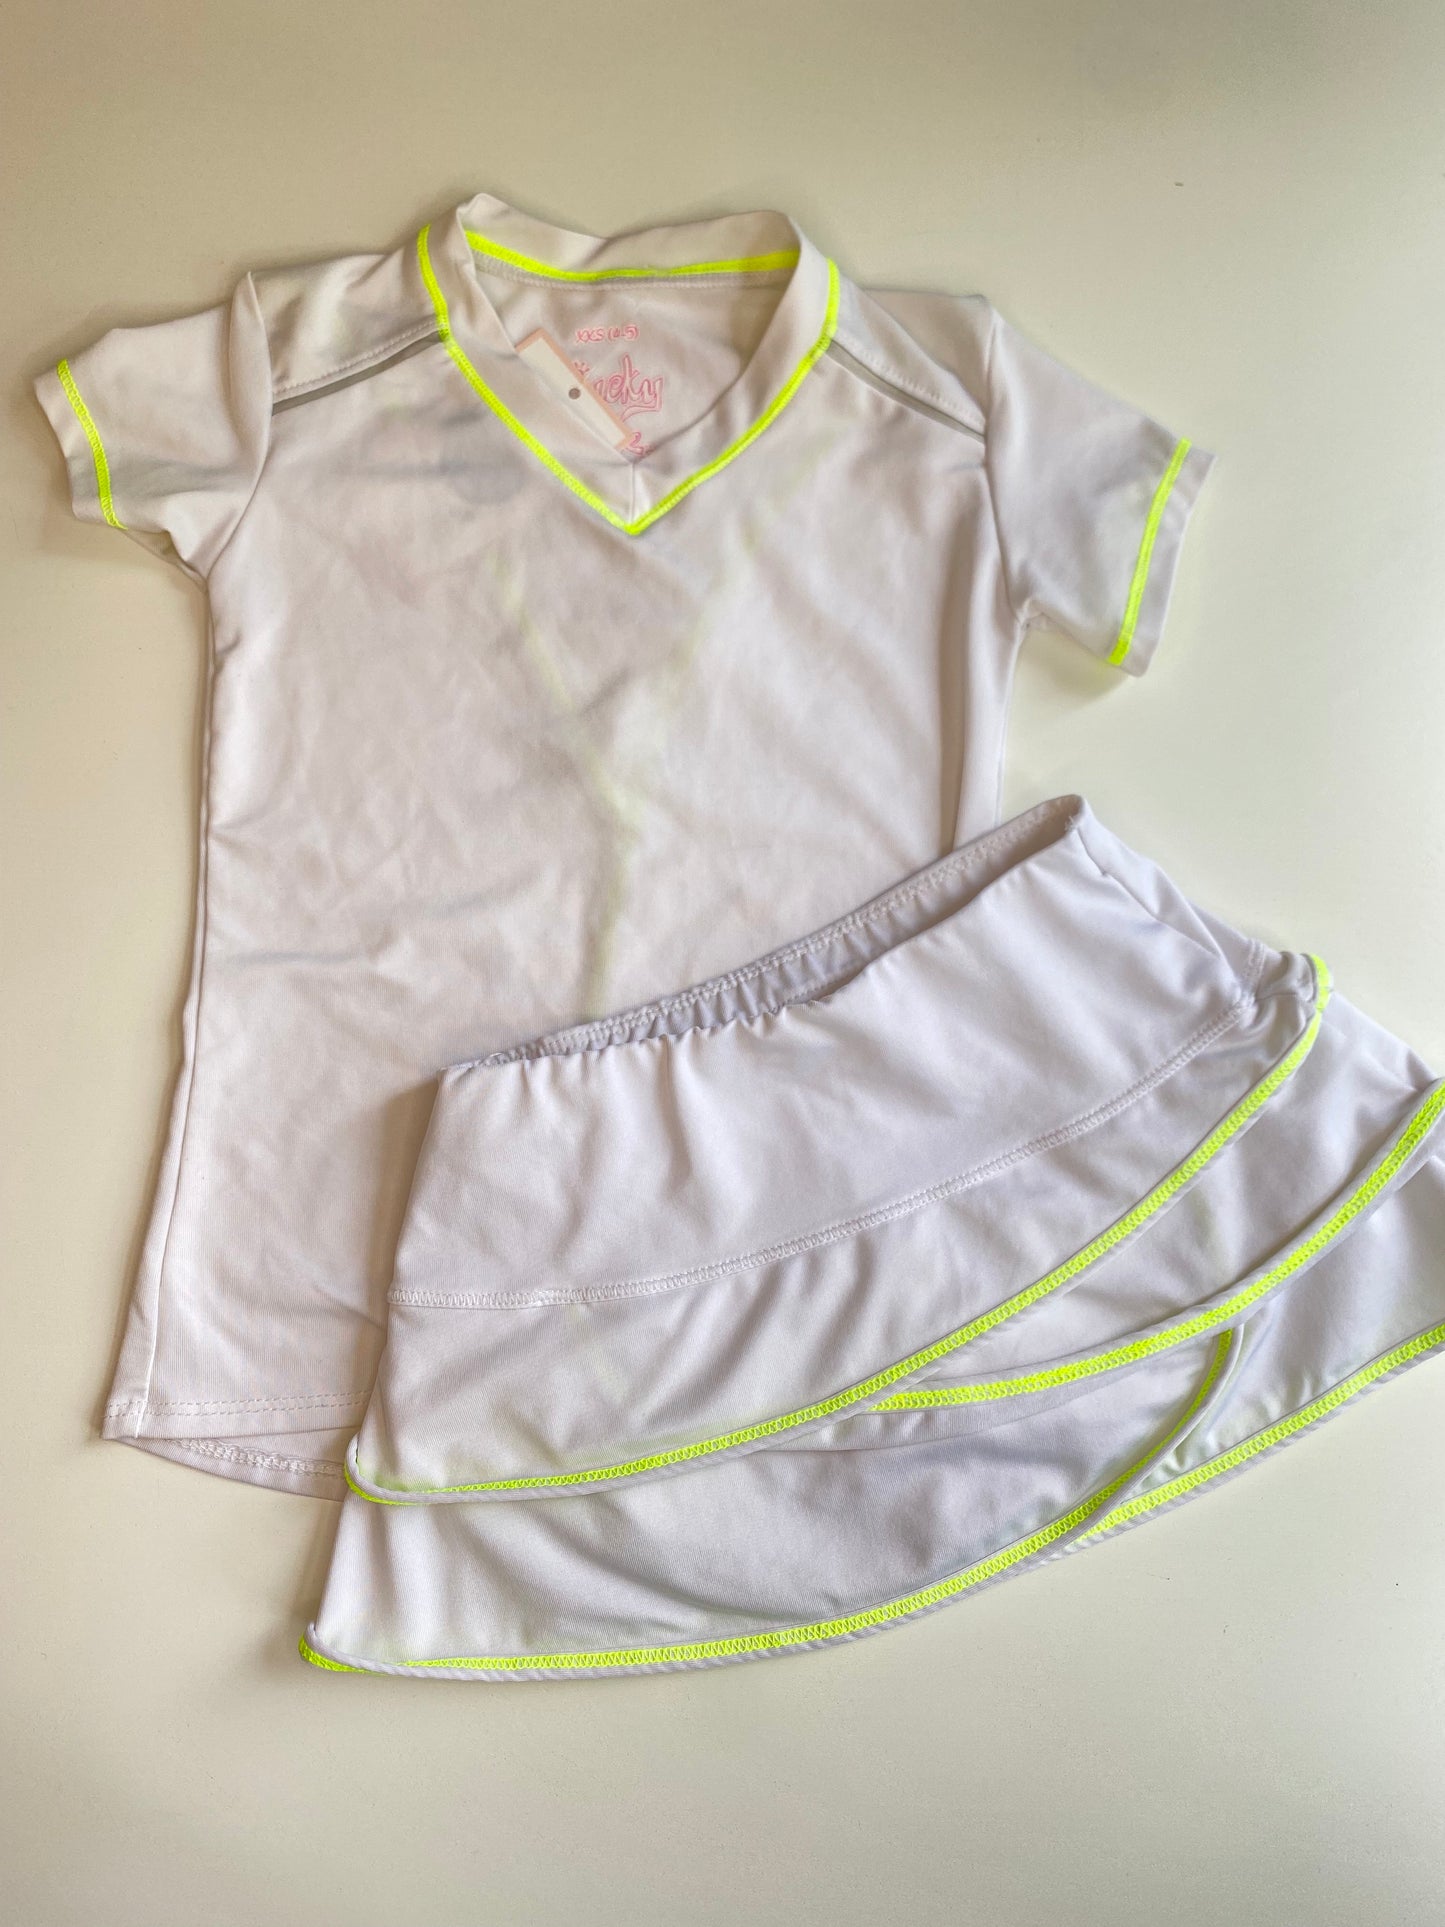 LUCKY IN LOVE 2 pieces Tennis Outfit Size 4-5y